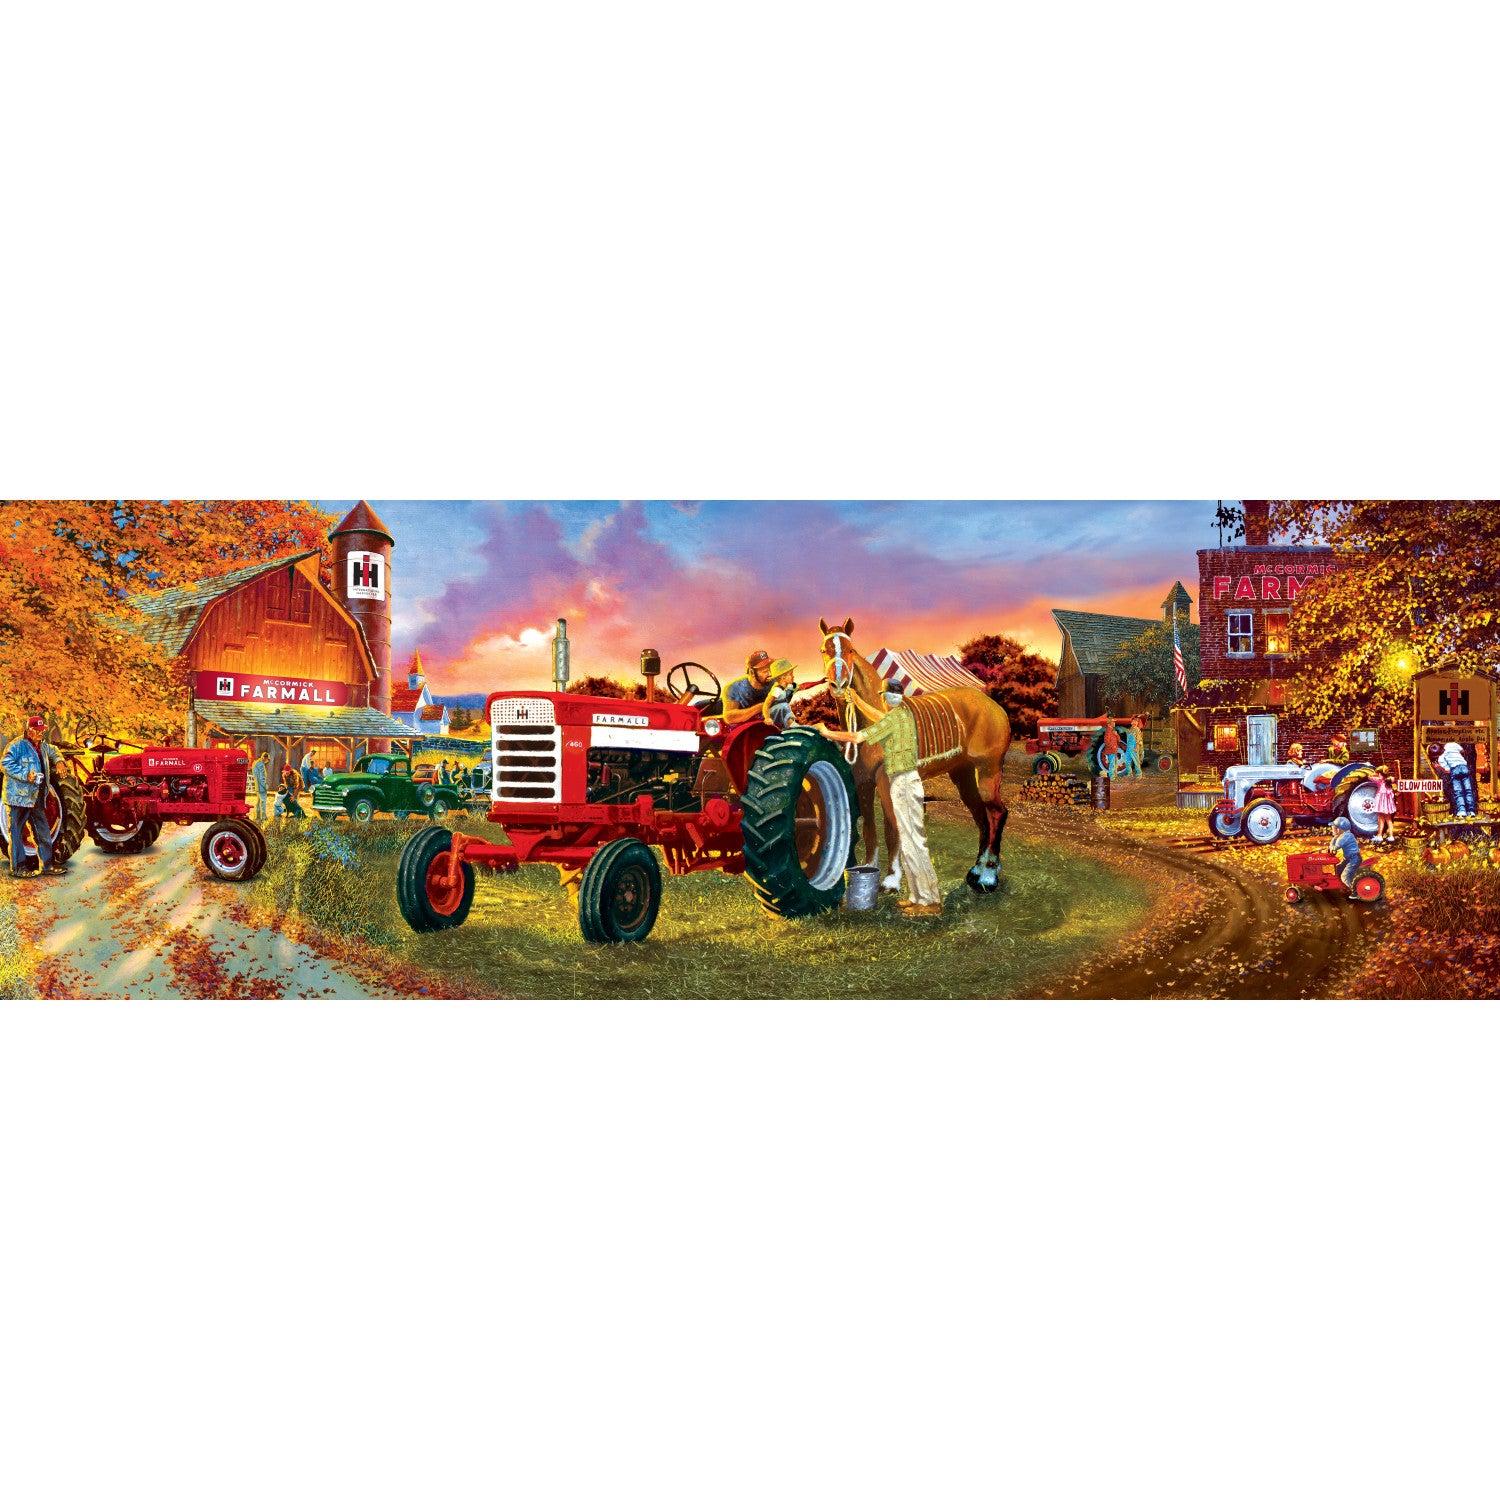 Case IH/Farmall - Horse Power 1000 Piece Panoramic Puzzle